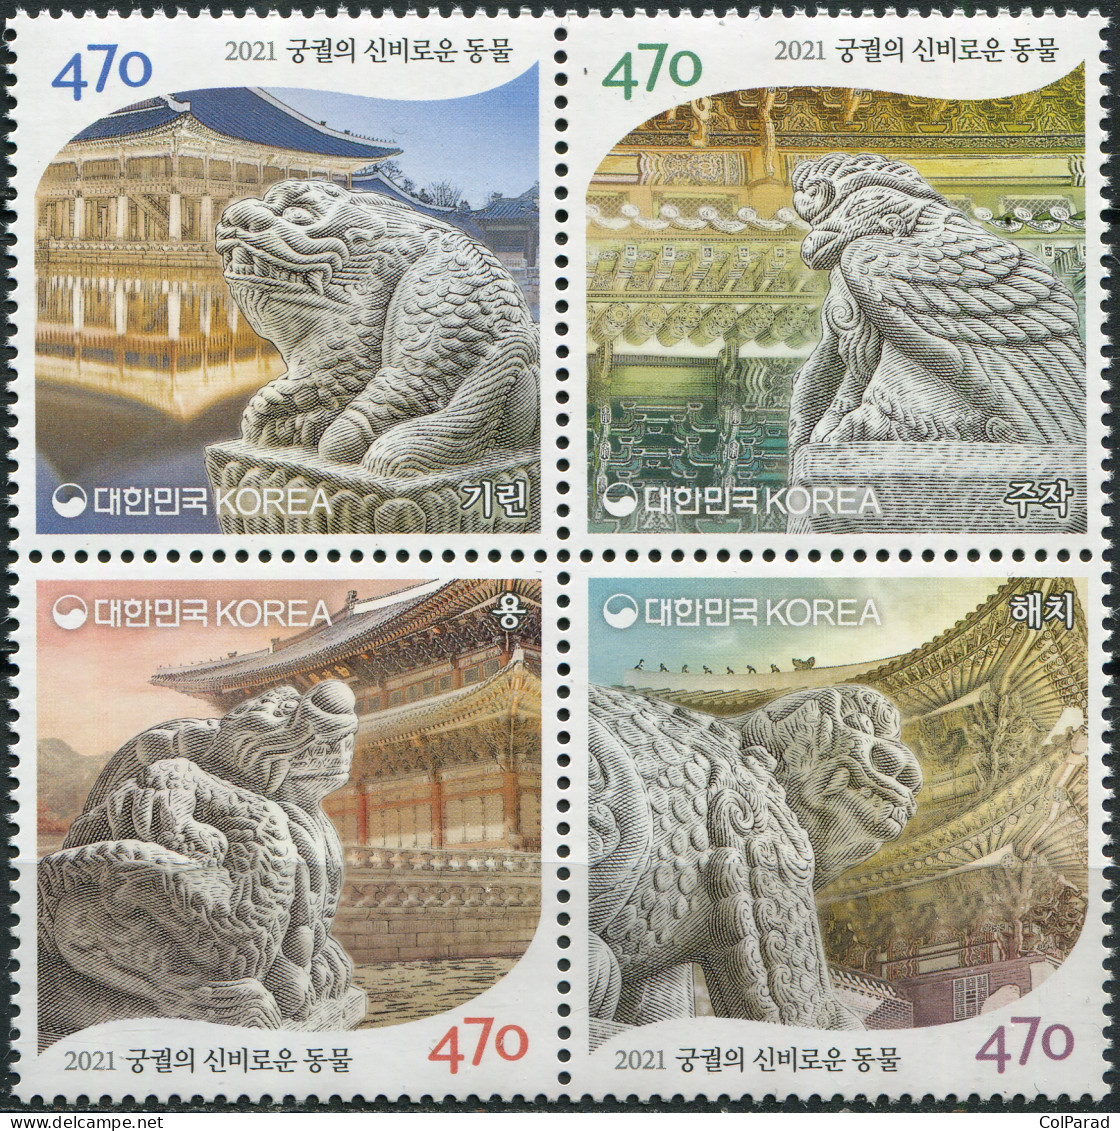 SOUTH KOREA - 2021 - BLOCK OF 4 STAMPS MNH ** - Statues Of Mythical Creatures - Korea (Zuid)